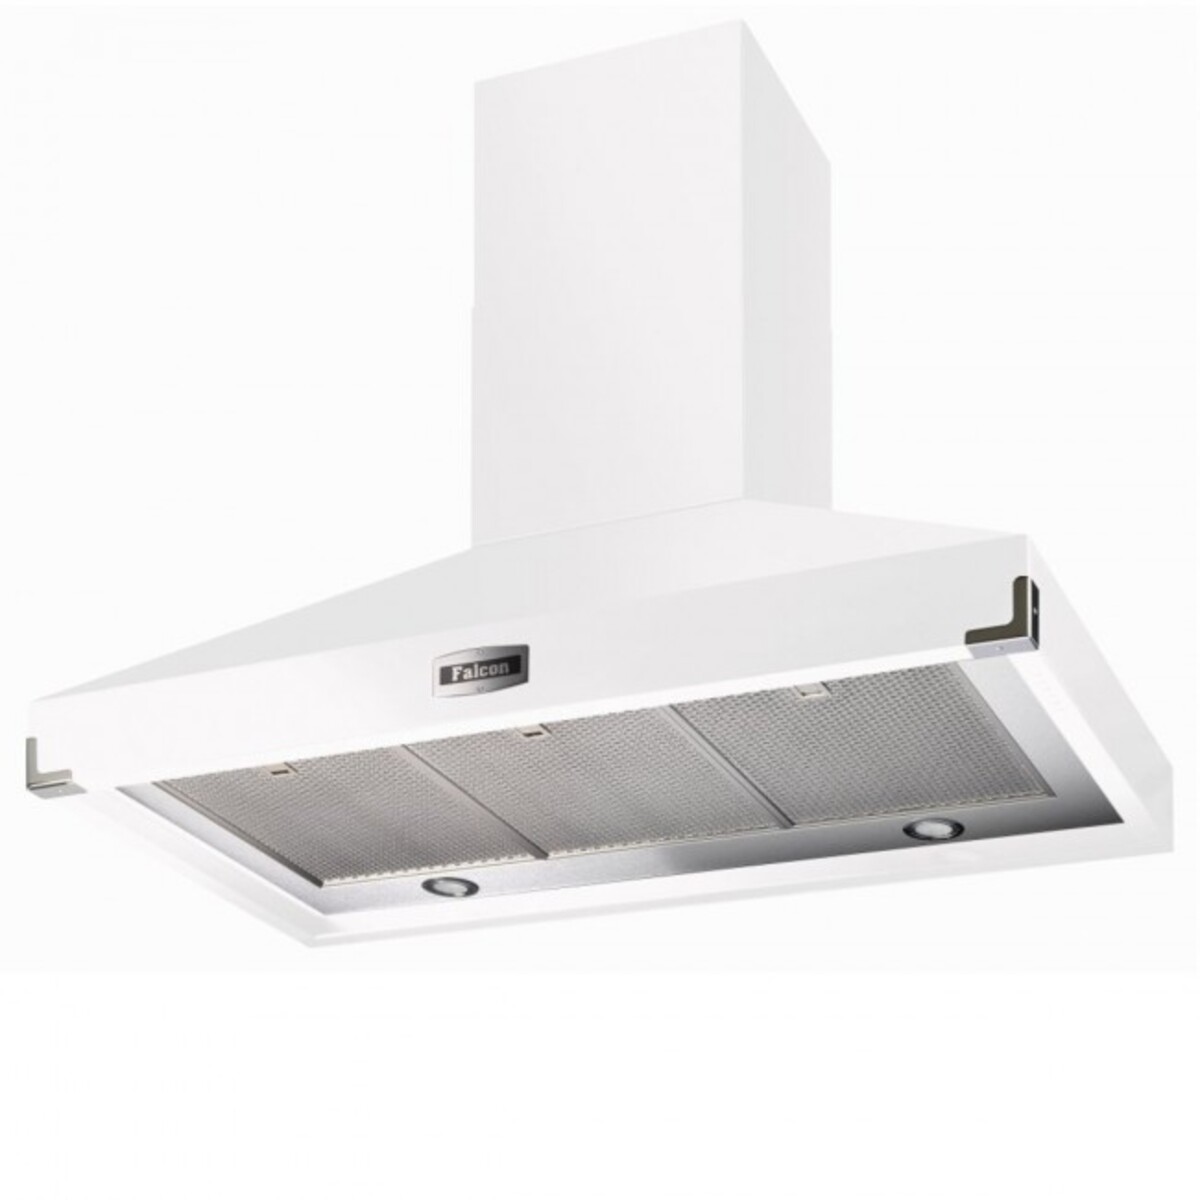 FALCON FHDSE900WHN 90760 900 S-EXTRACT HOOD WHITE NICKEL